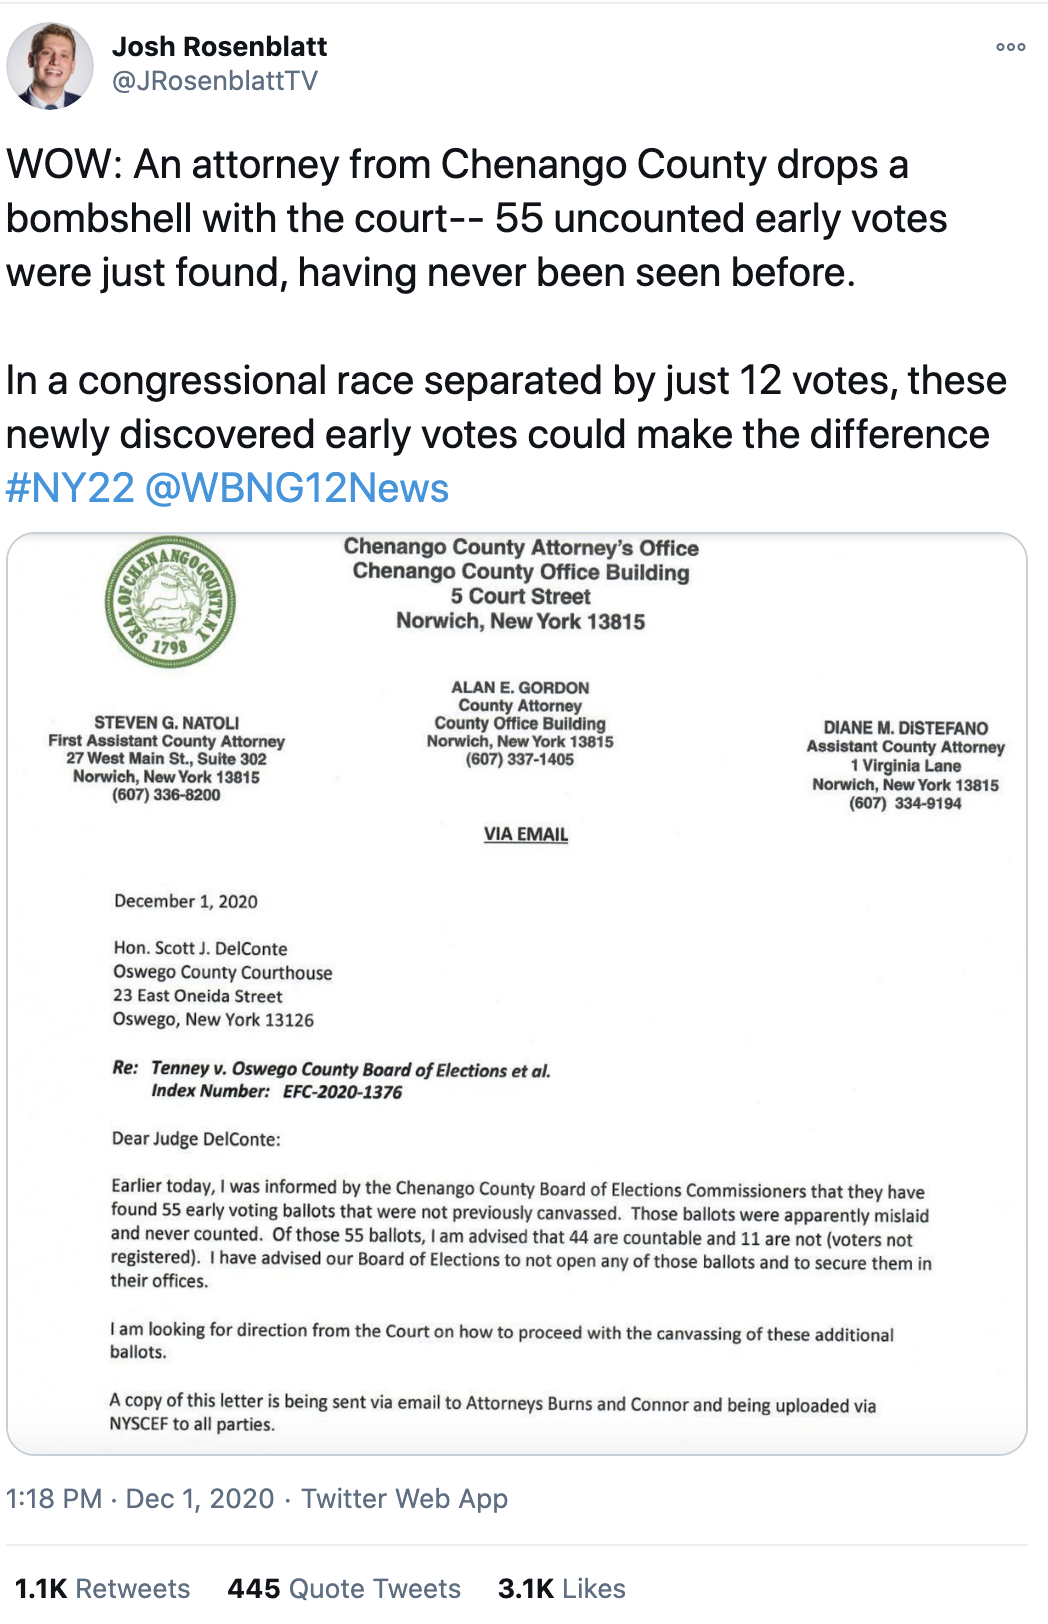 Screen-Shot-2020-12-02-at-1.16.50-PM Lost Ballots Recovered In 22nd District Could Sway Race Won By 12 Votes Coronavirus Corruption Crime Featured Politics Top Stories 